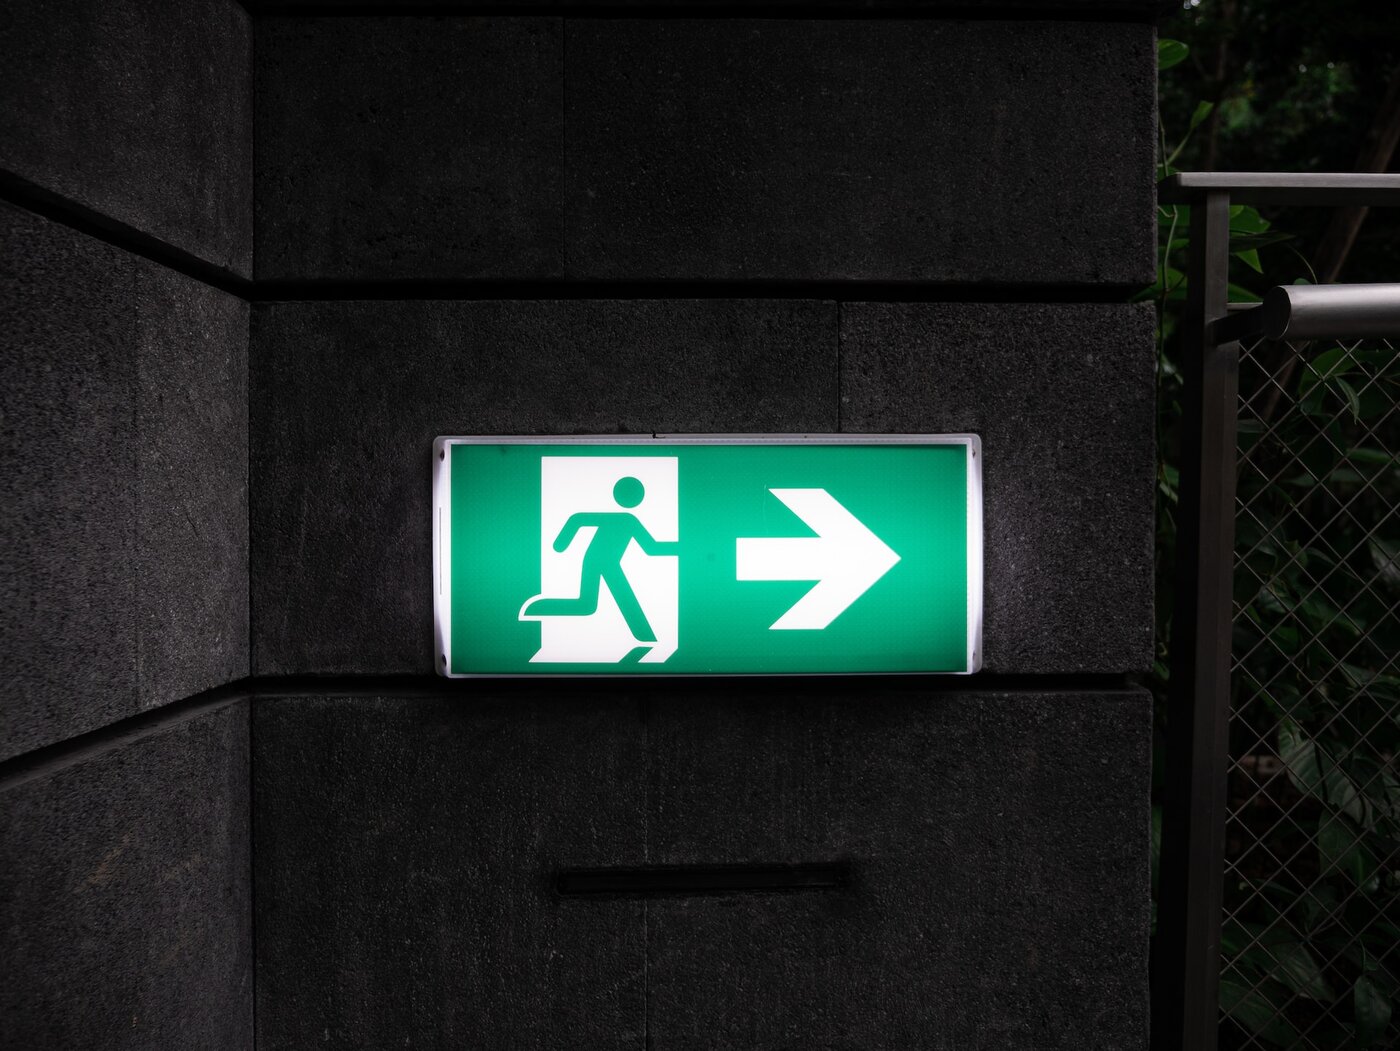 White and green exit sign | © by Andrew Teoh on Unsplash